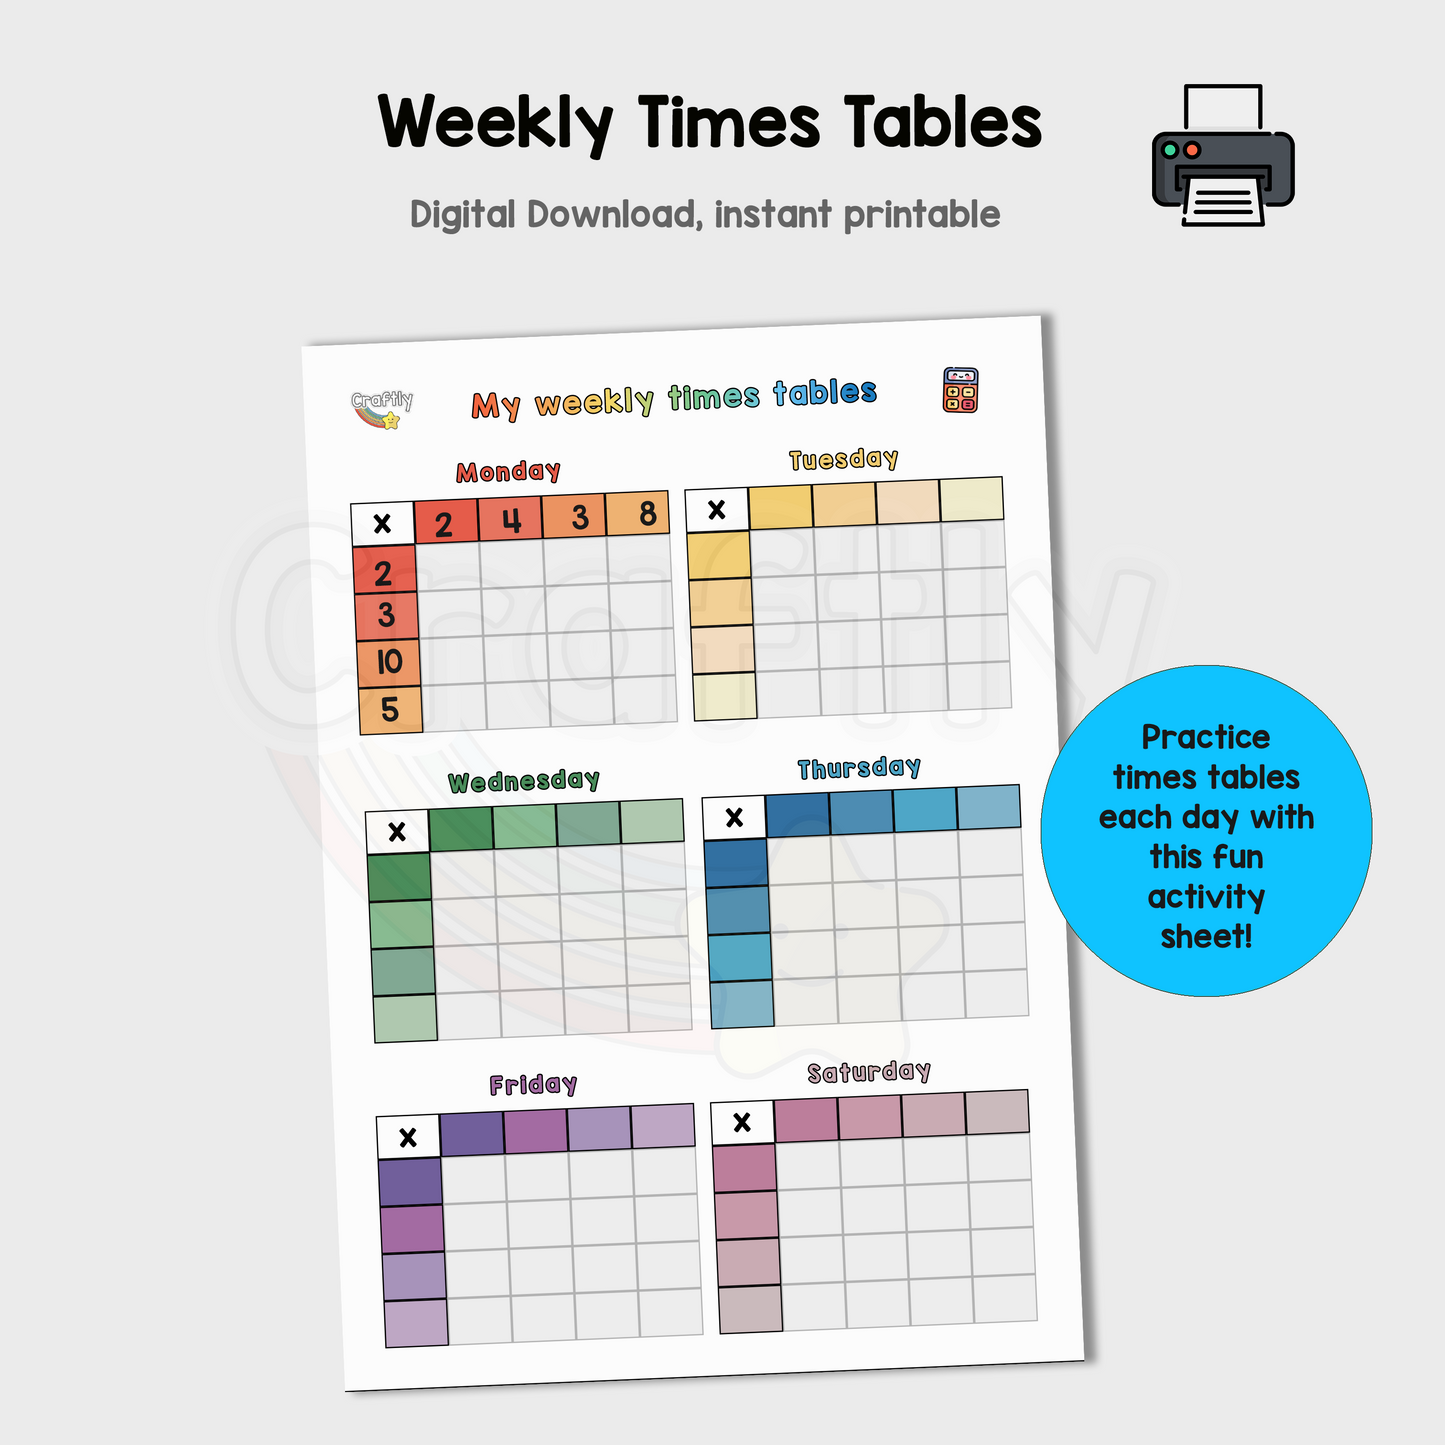 Daily Times Table Practice Sheet